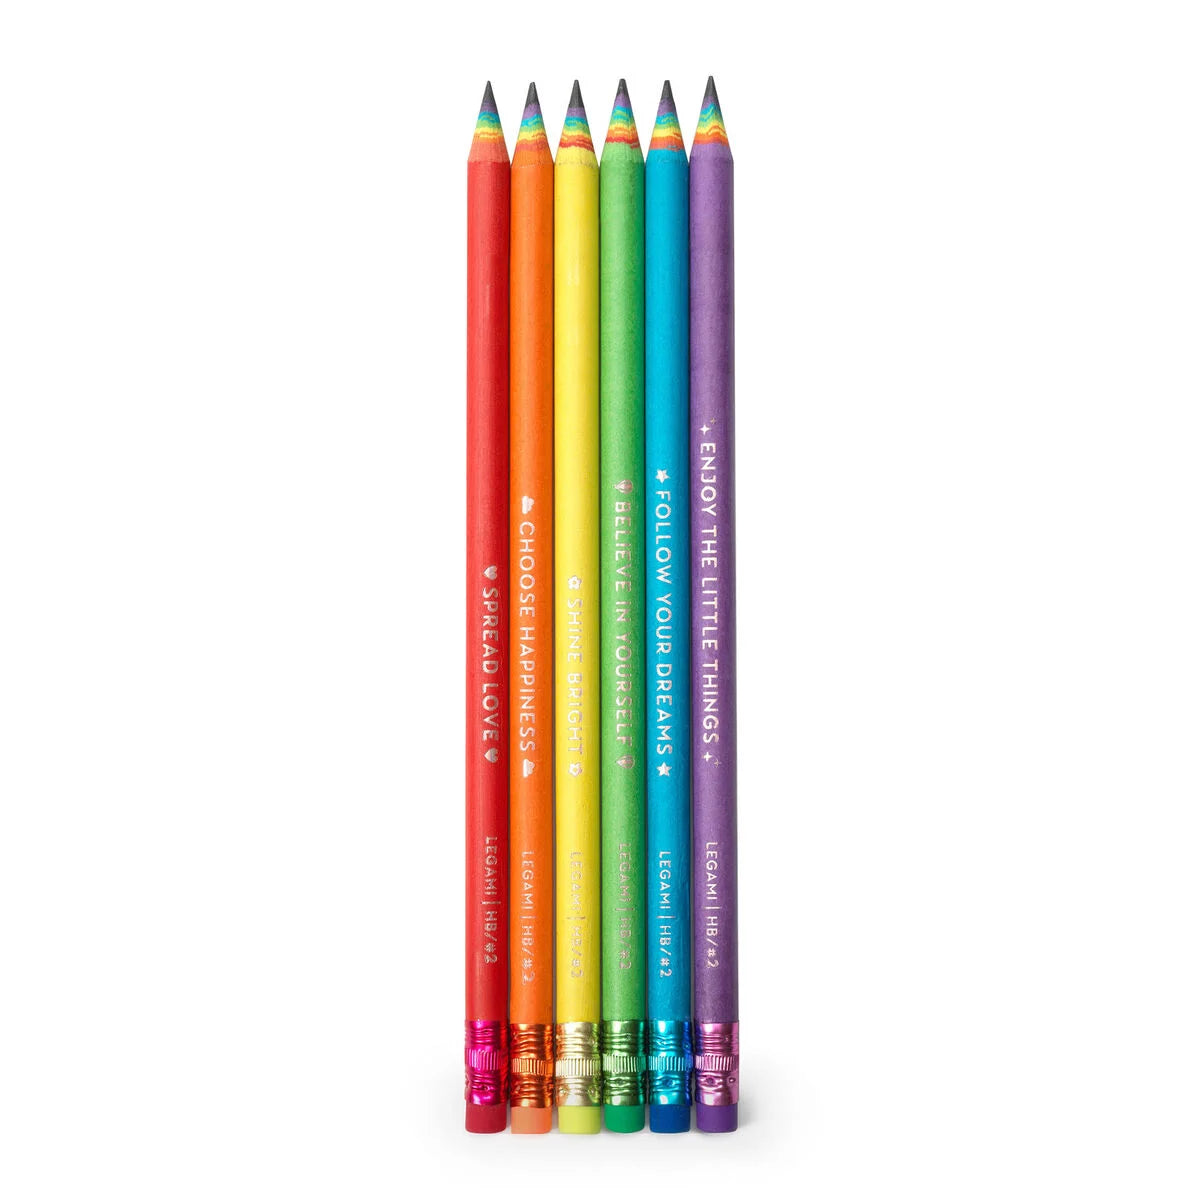 Legami Happiness For Every Day - Set Of 6 HB Graphite Pencils